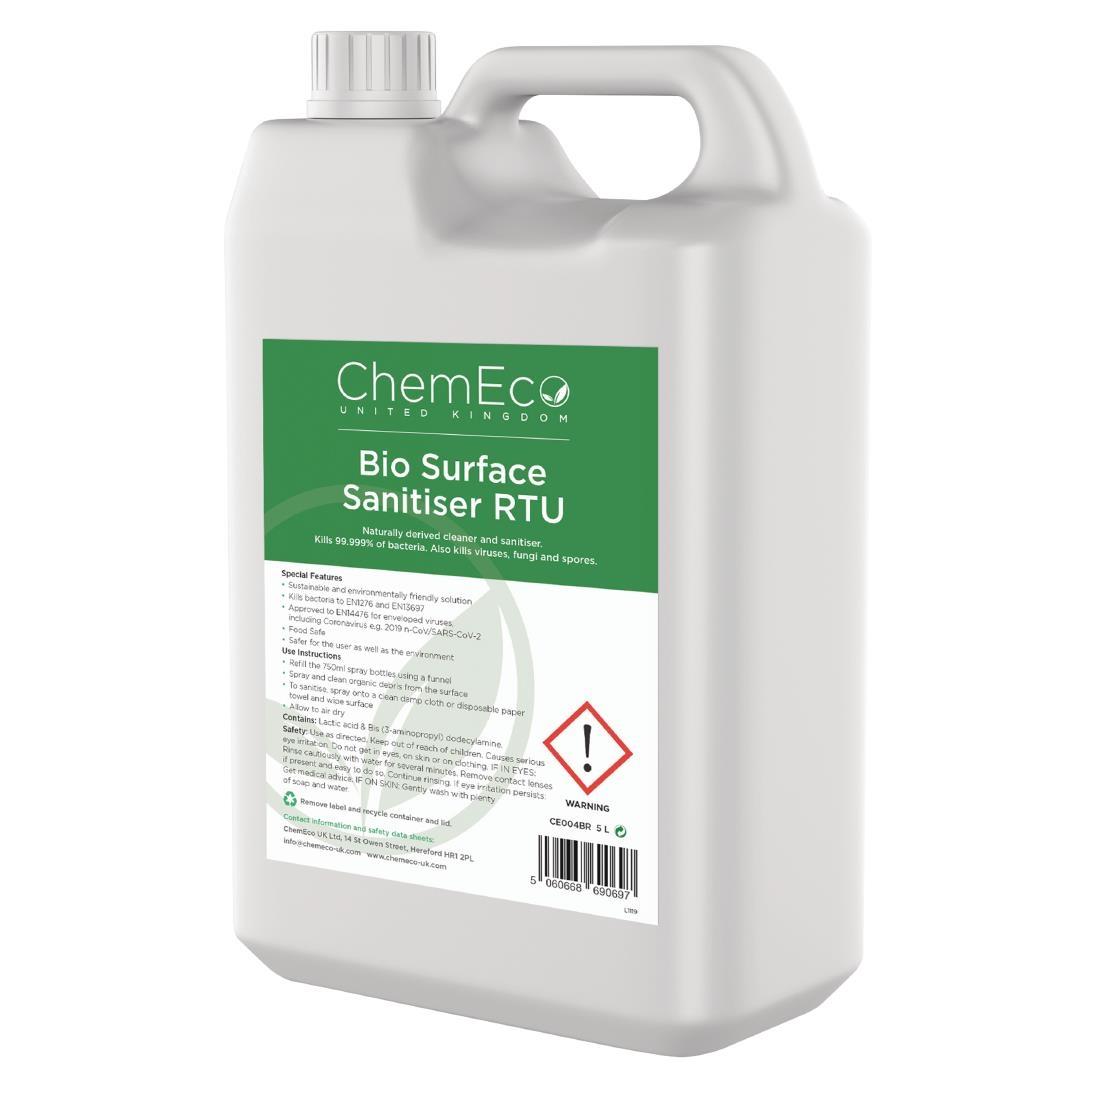 ChemEco Bio Surface Sanitiser Ready To Use 5Ltr (Pack of 2) - DY018  - 1